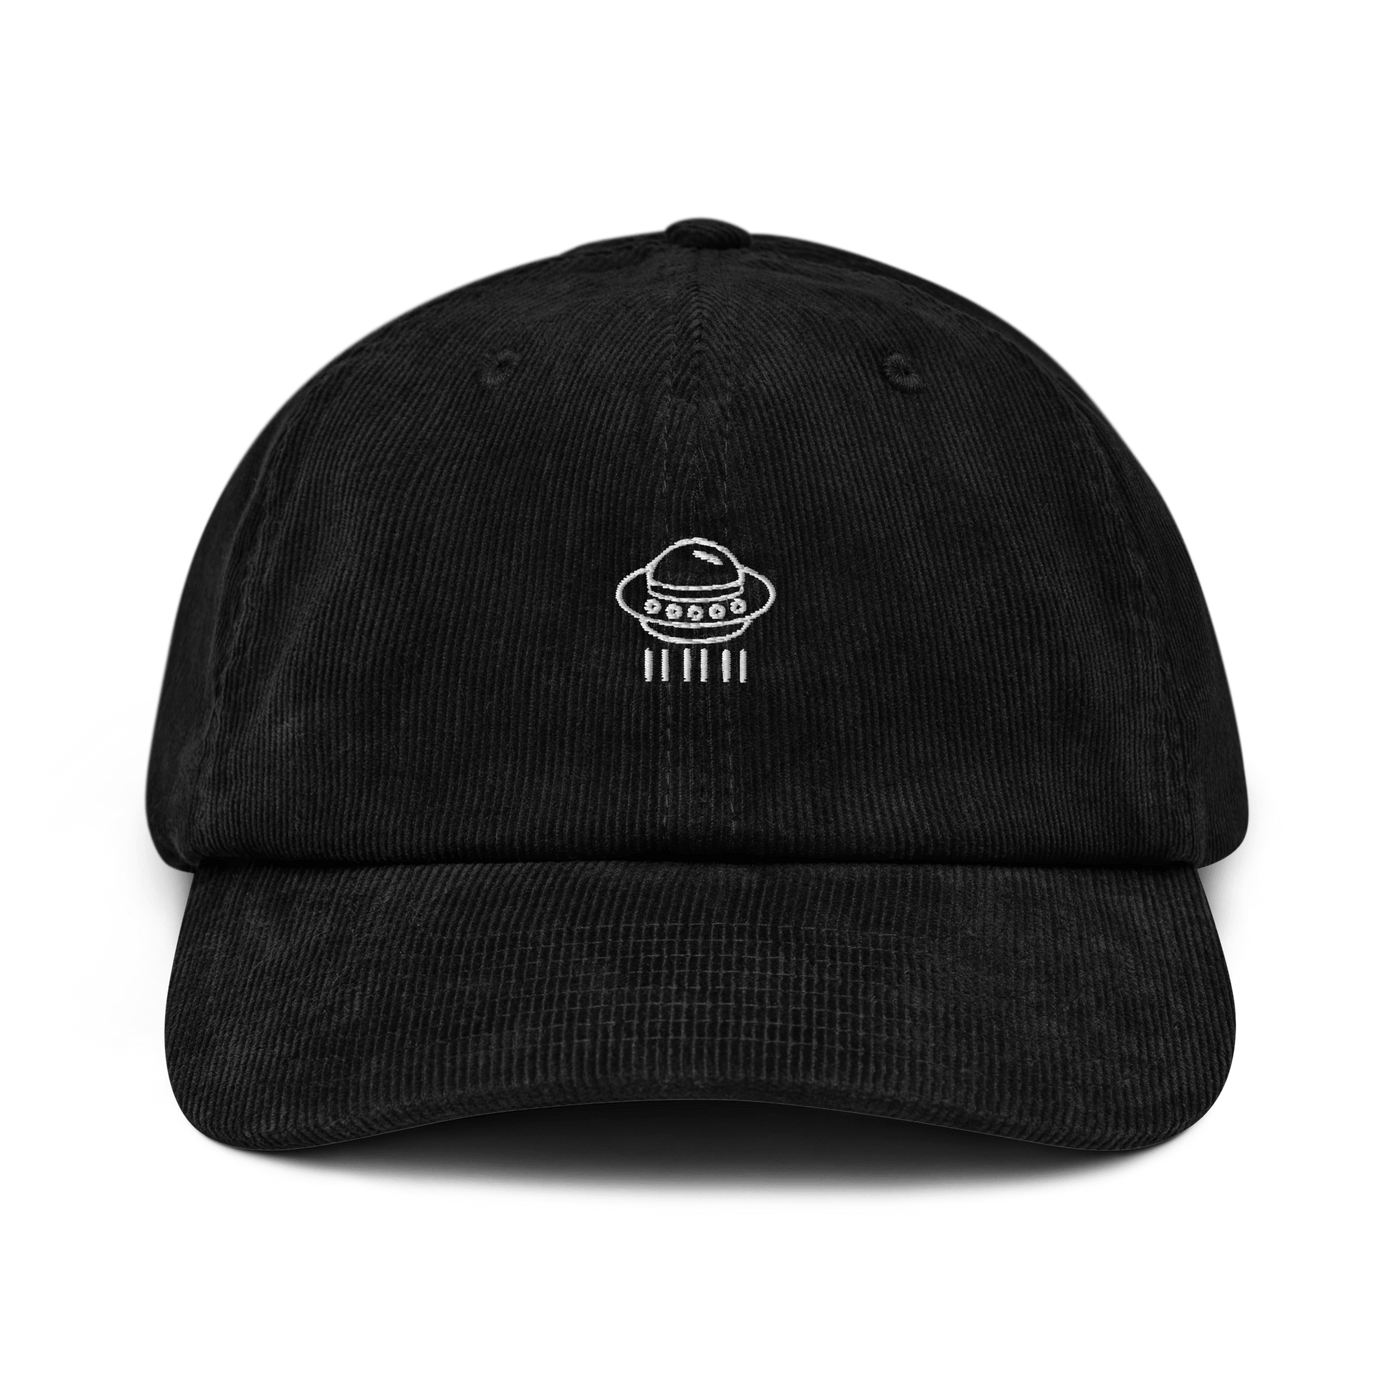 UFO Corduroy hat - Black - - Just Another Cap Store